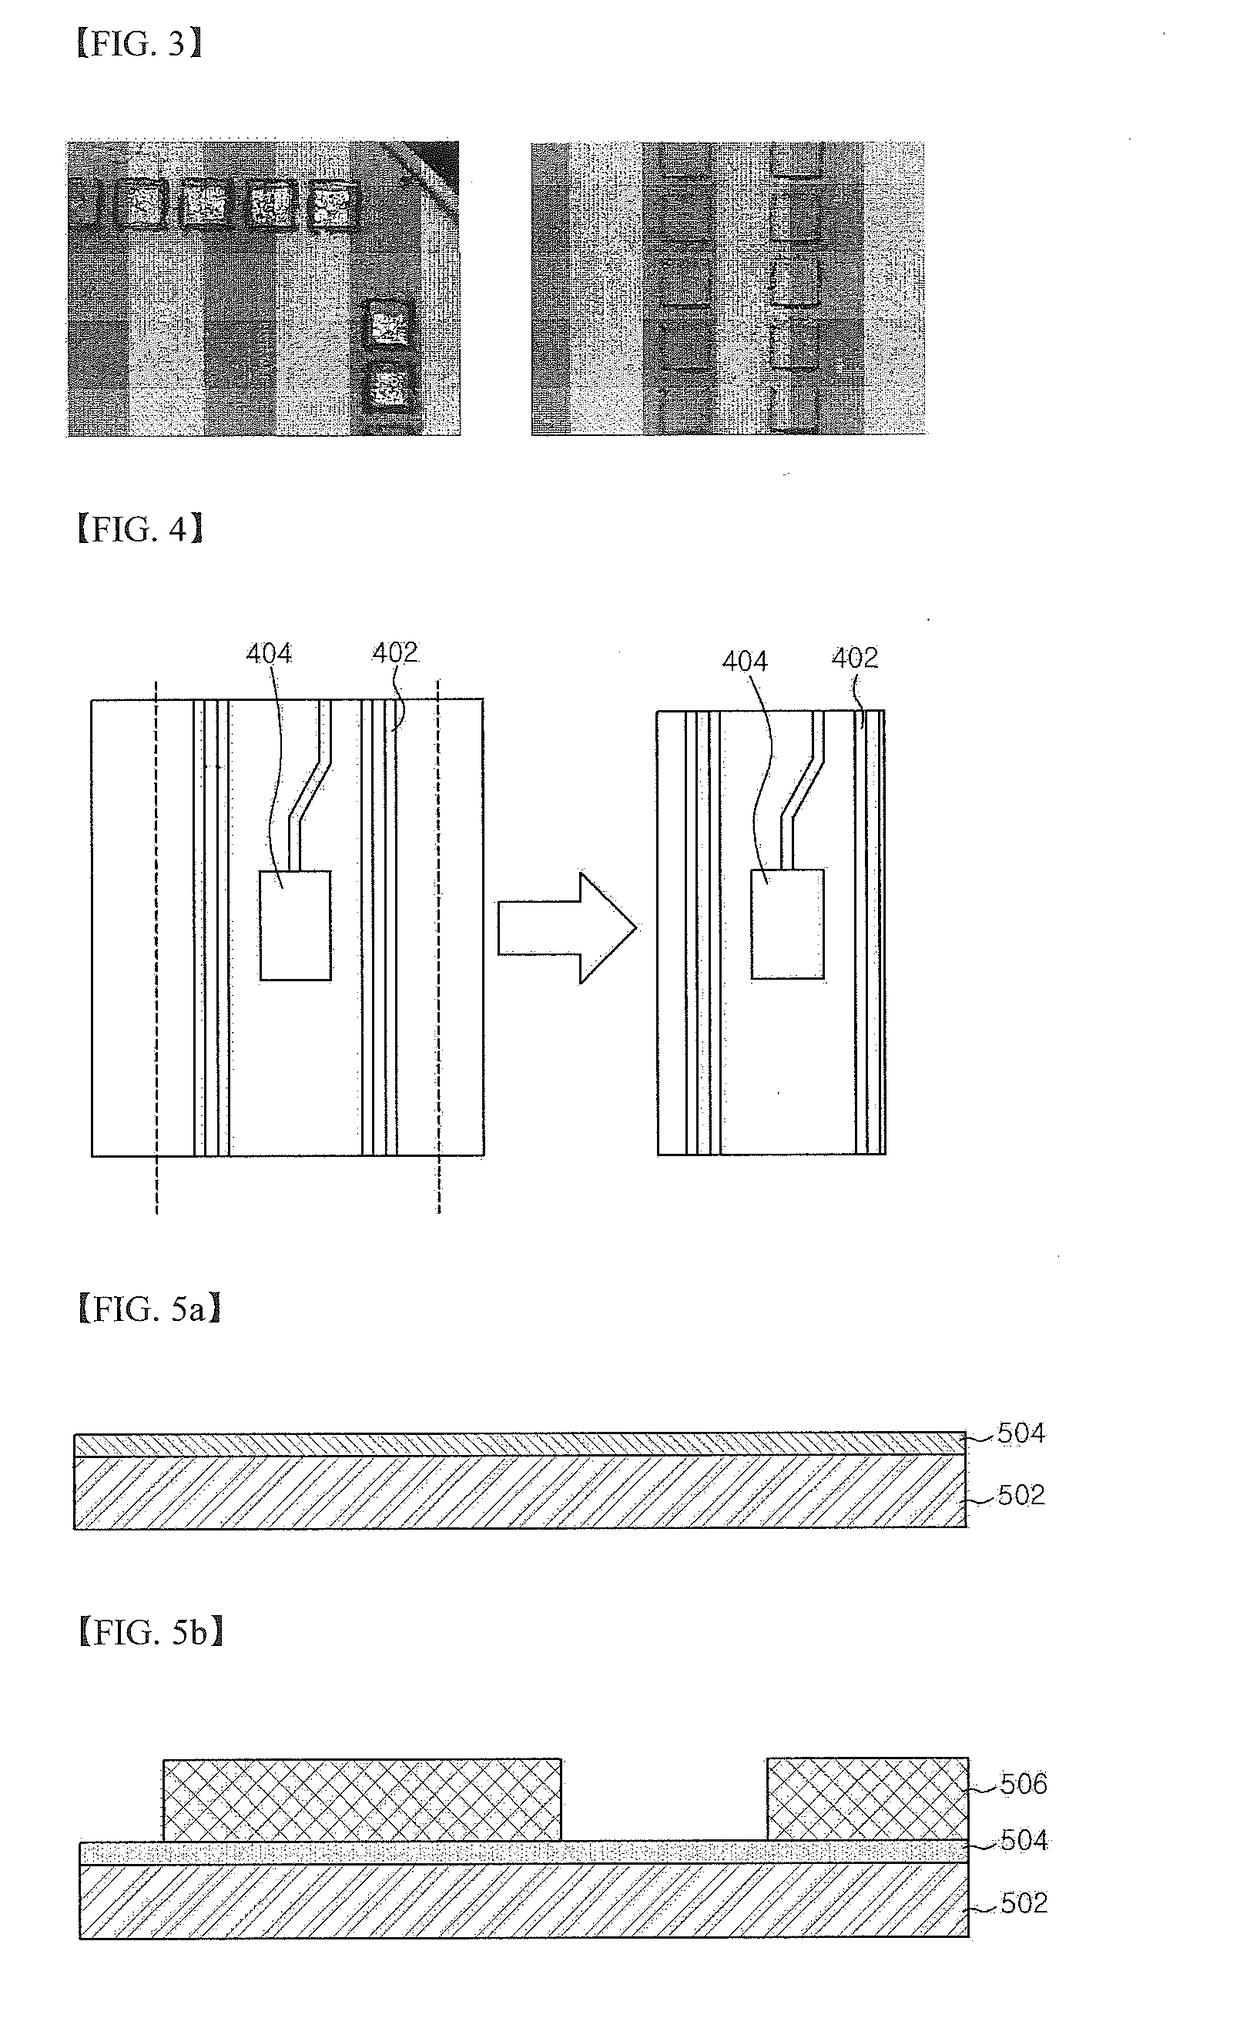 Liquid crystal polymer-based electrode array and package for neural implant, and manufacturing method therefor